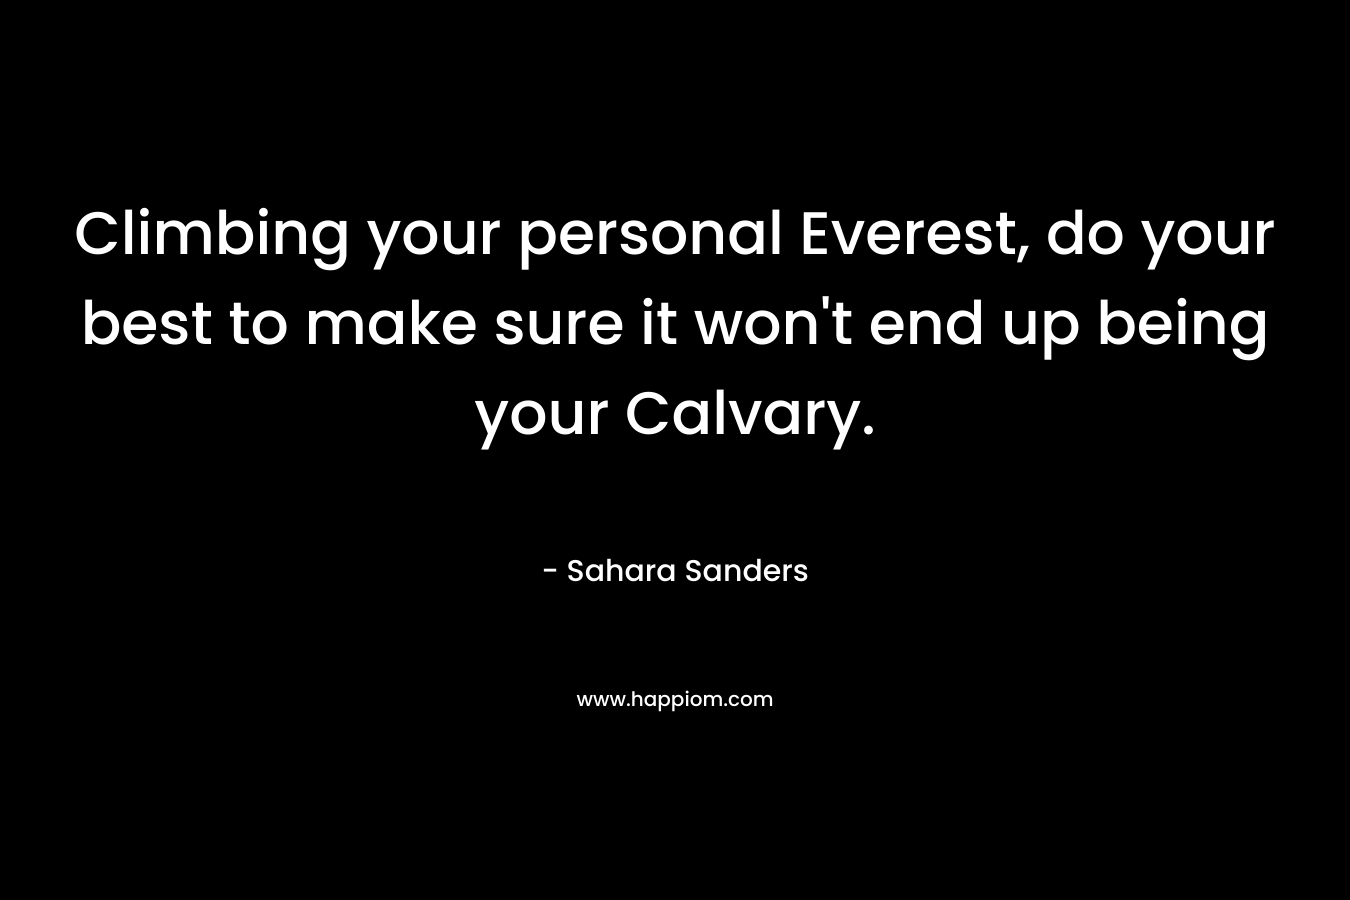 Climbing your personal Everest, do your best to make sure it won't end up being your Calvary.